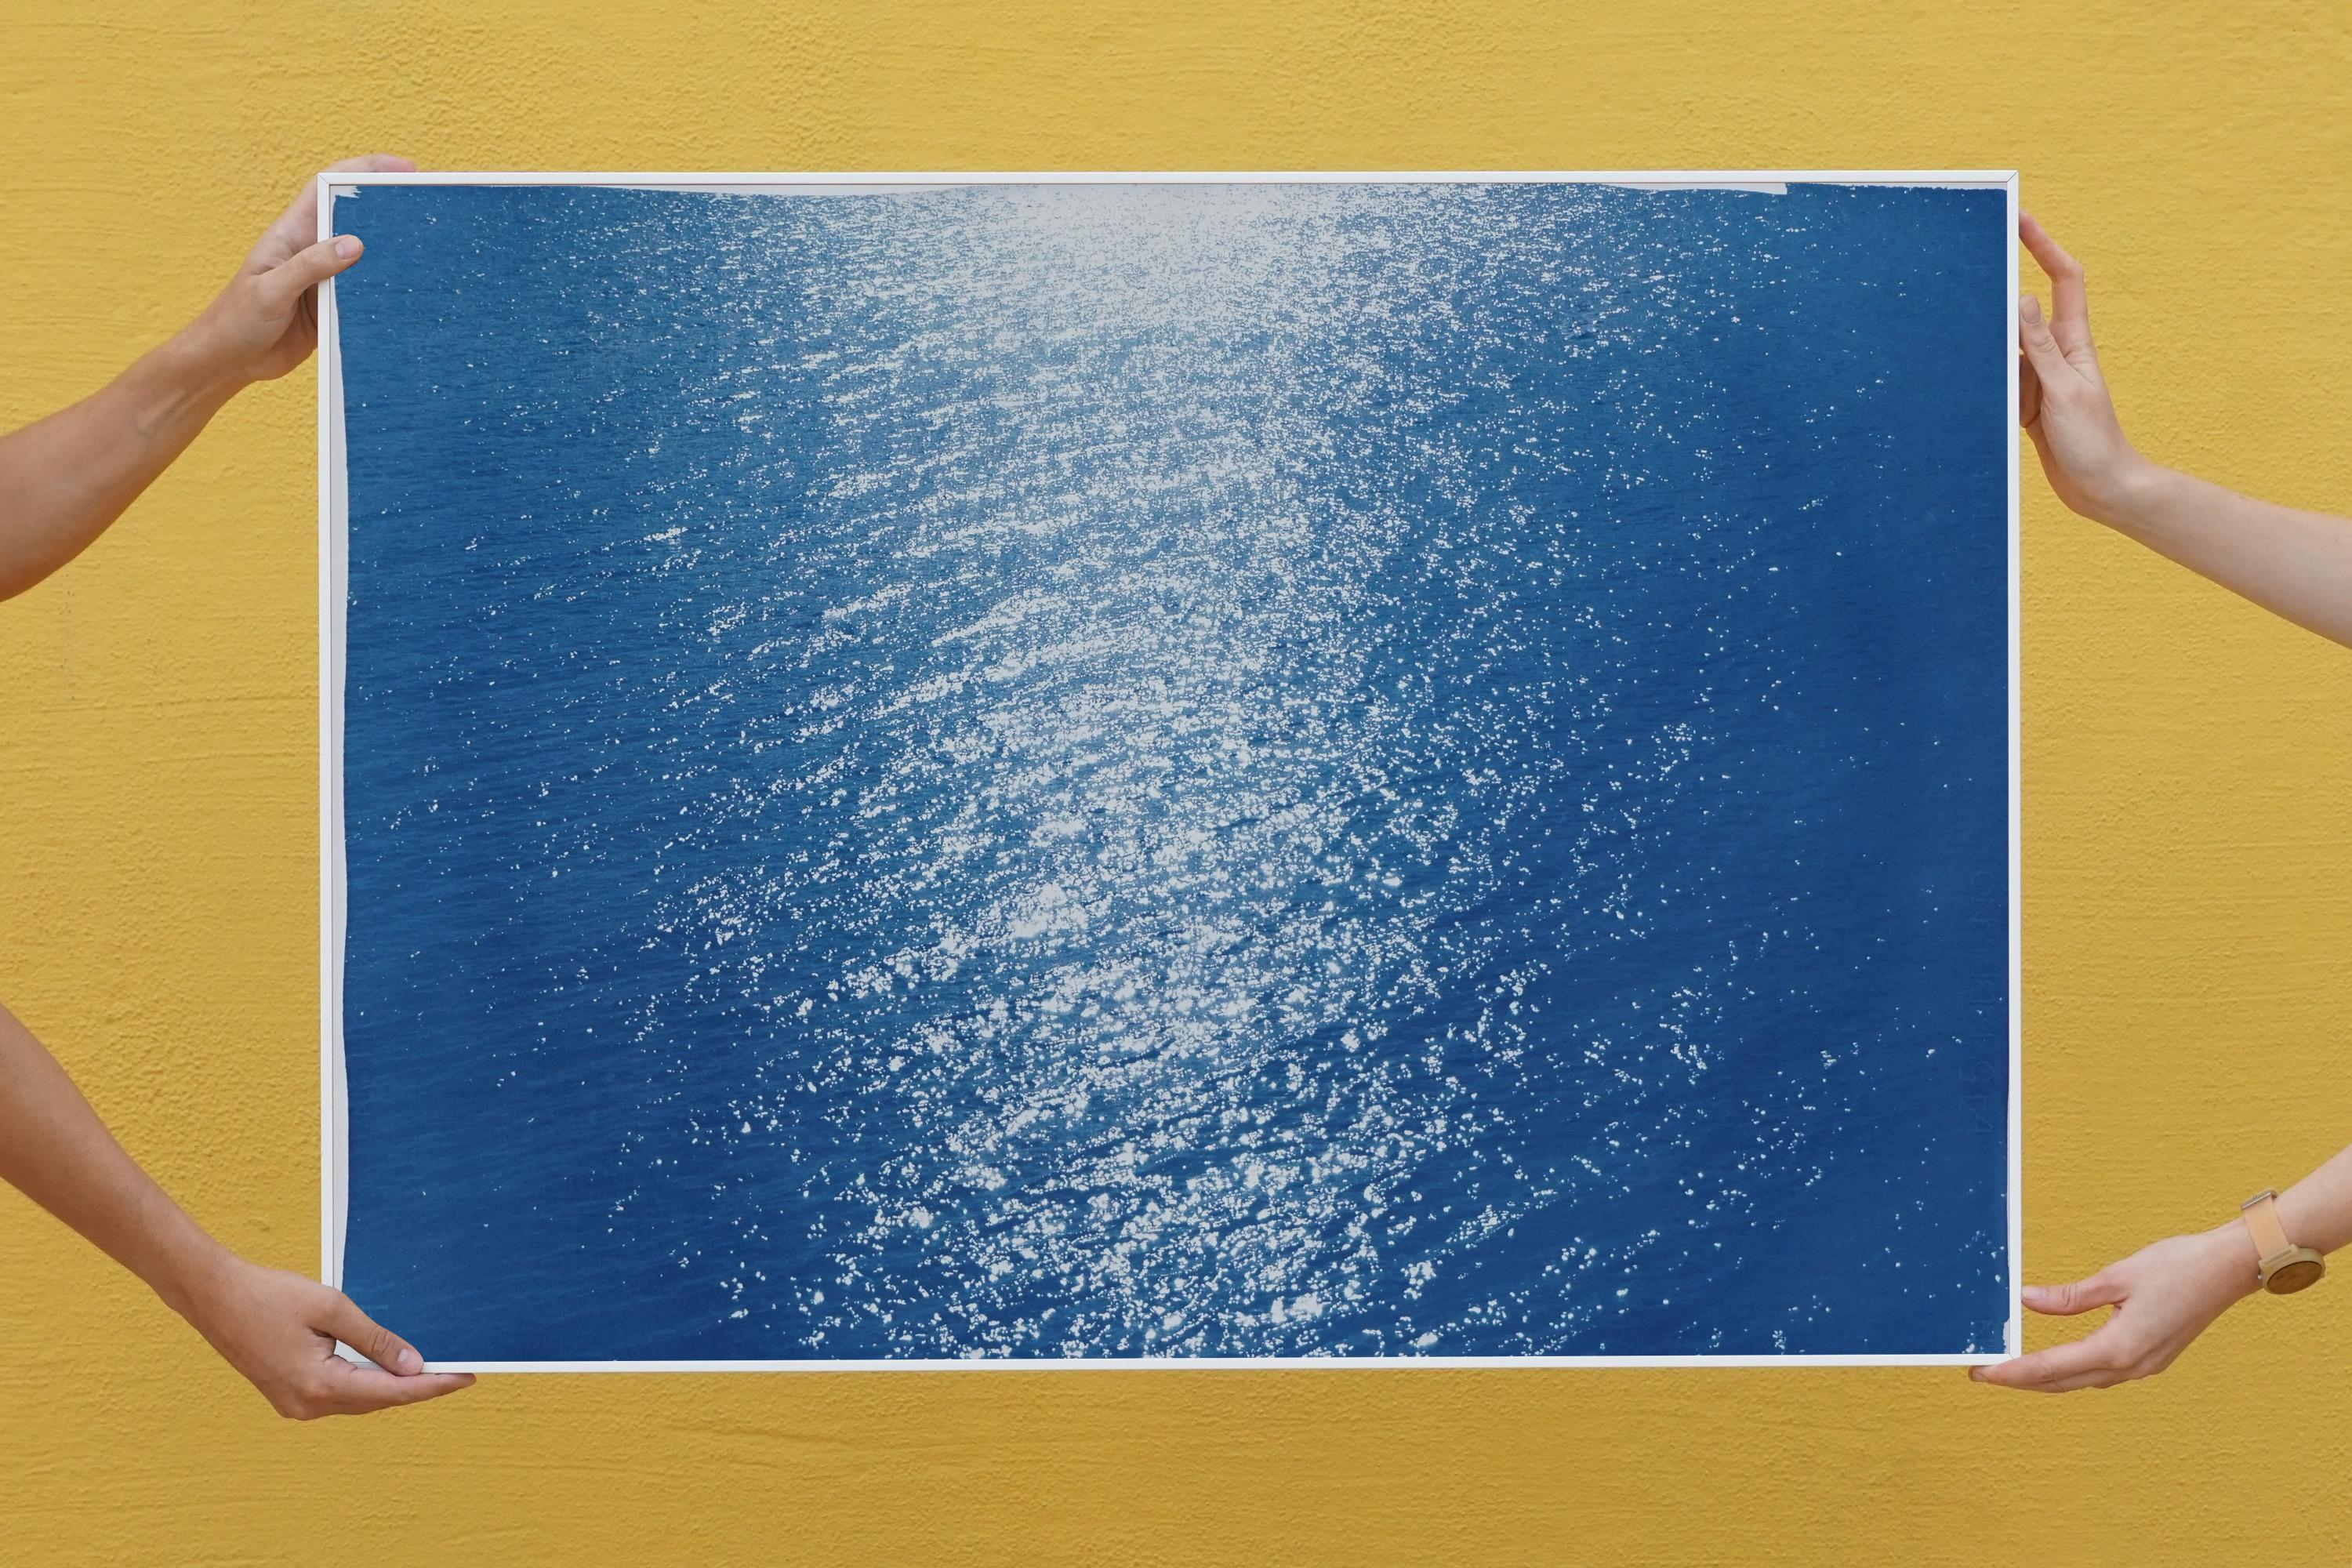 This is an exclusive handprinted limited edition cyanotype.
Splendid Italian seascape showing the sun's reflection on the Mediterranean Sea.

Details:
+ Title: Tuscany Sea Reflections
+ Year: 2019
+ Edition Size: 50
+ Stamped and Certificate of